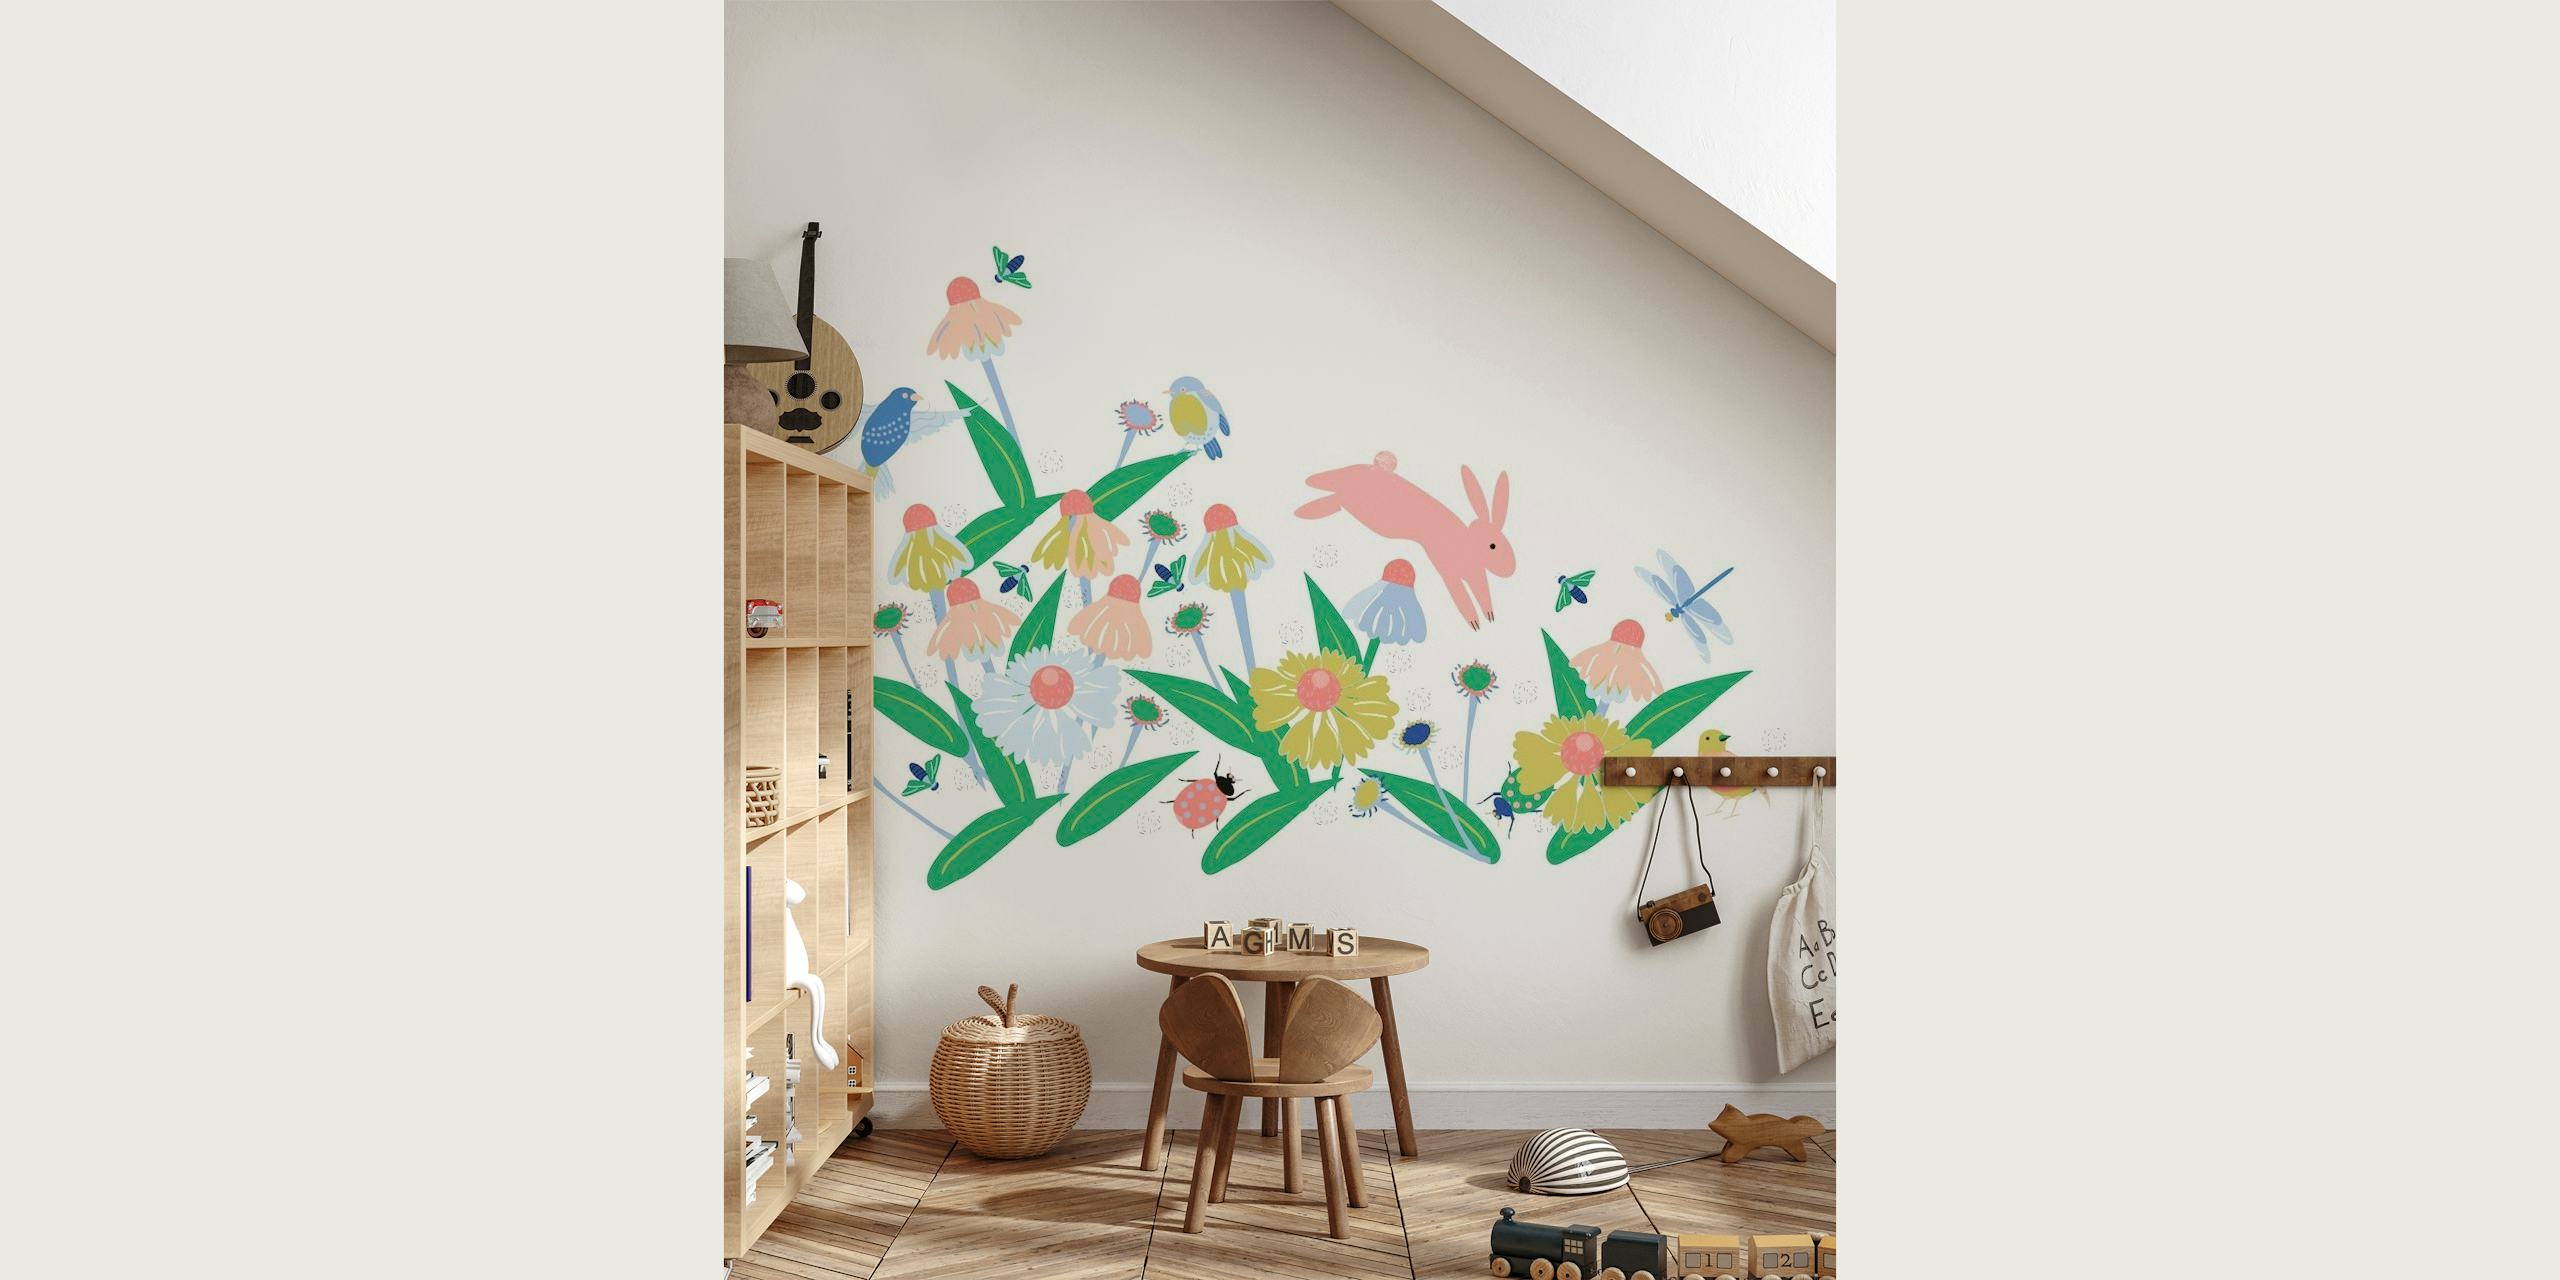 Pastel floral wall mural with birds and butterflies